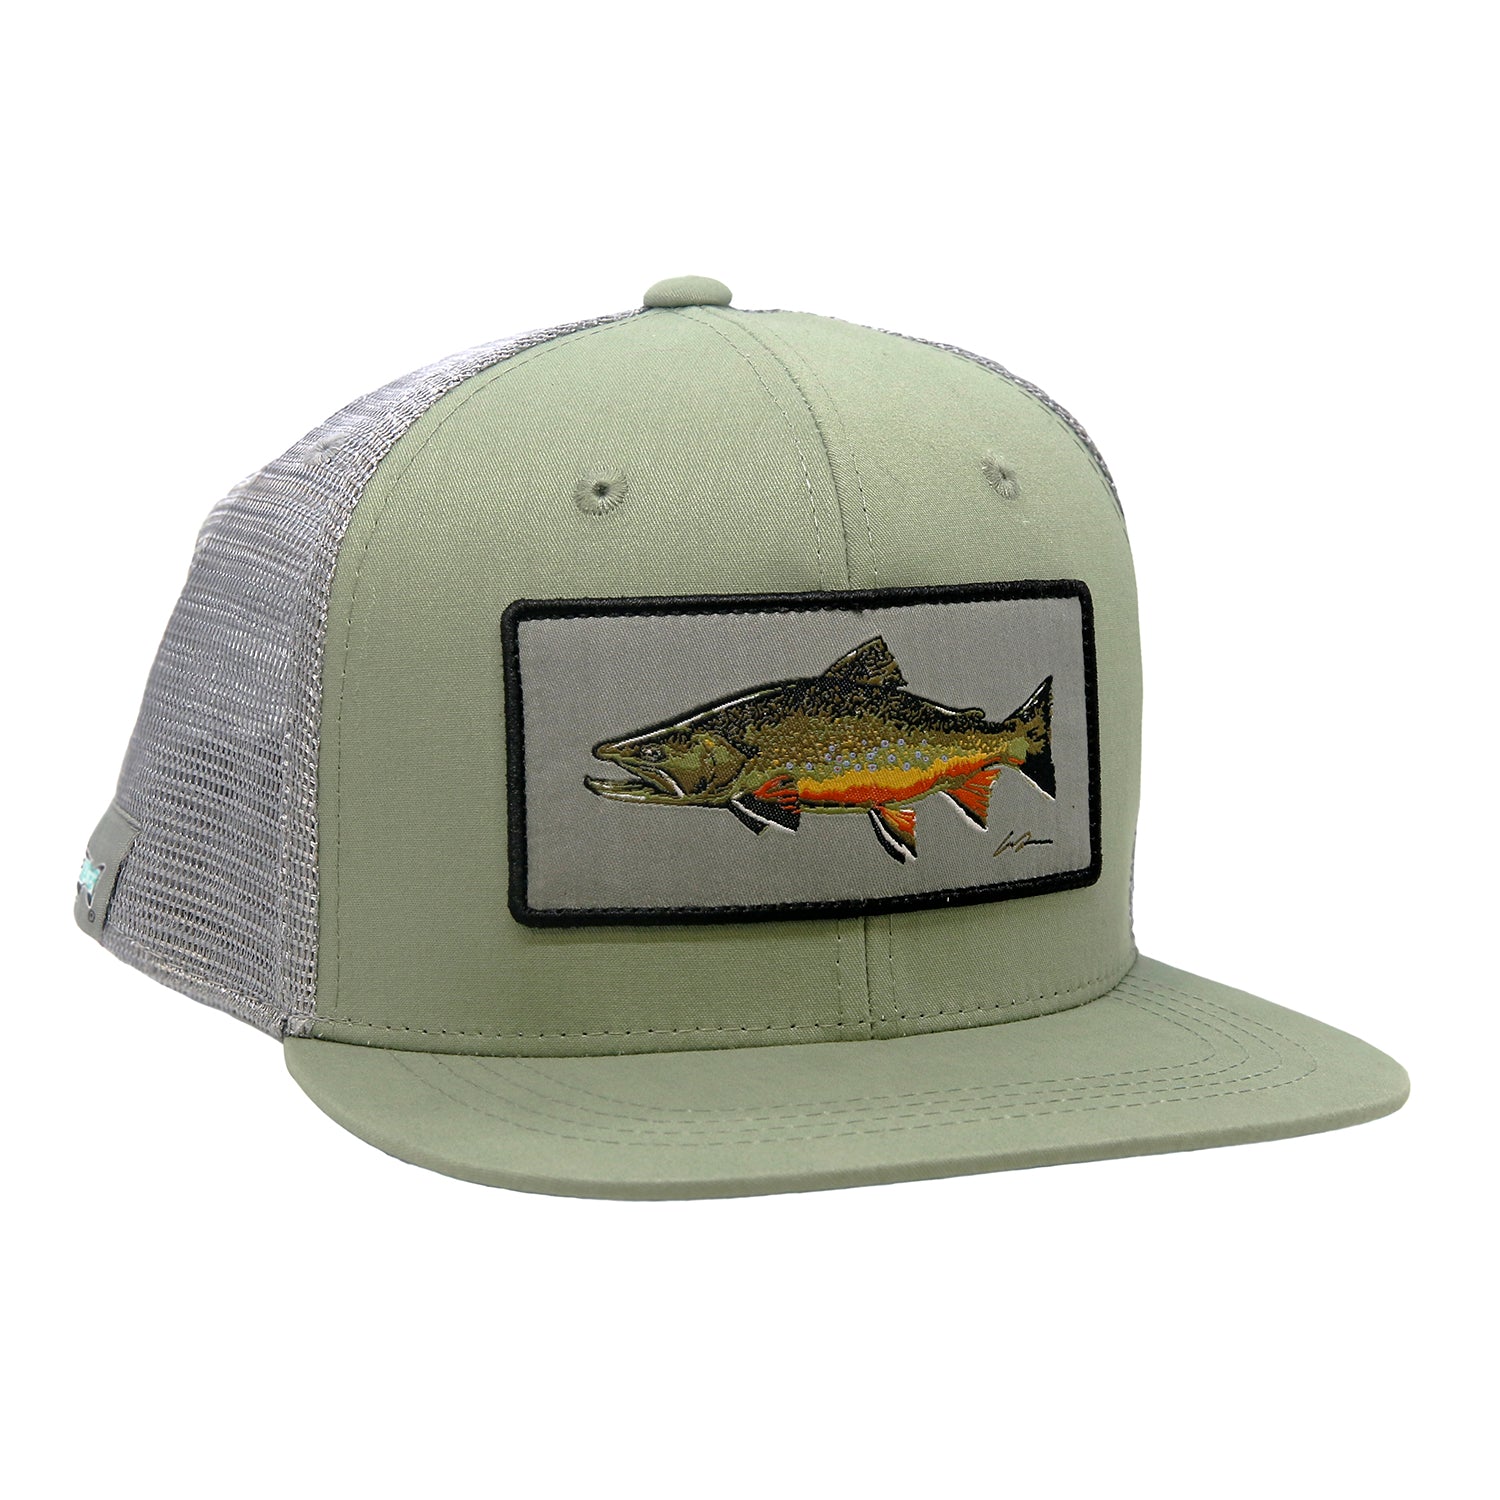 A hat with gray mesh in back and light green fabric in front has a rectangular patch with a large brook trout on it